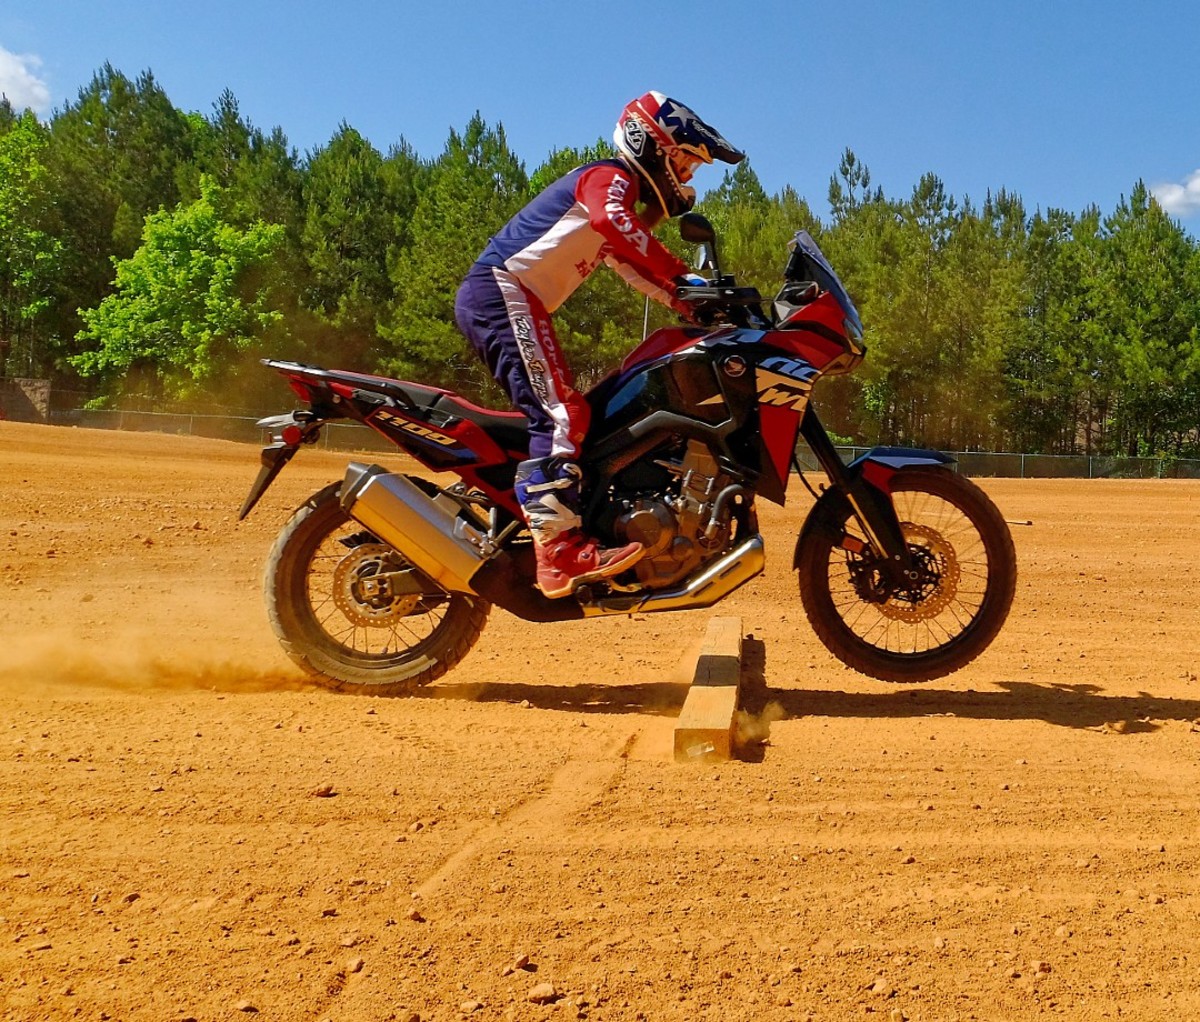 Finest Motorcycle Training Course Tips for Riding Your ADV Bike on Dirt